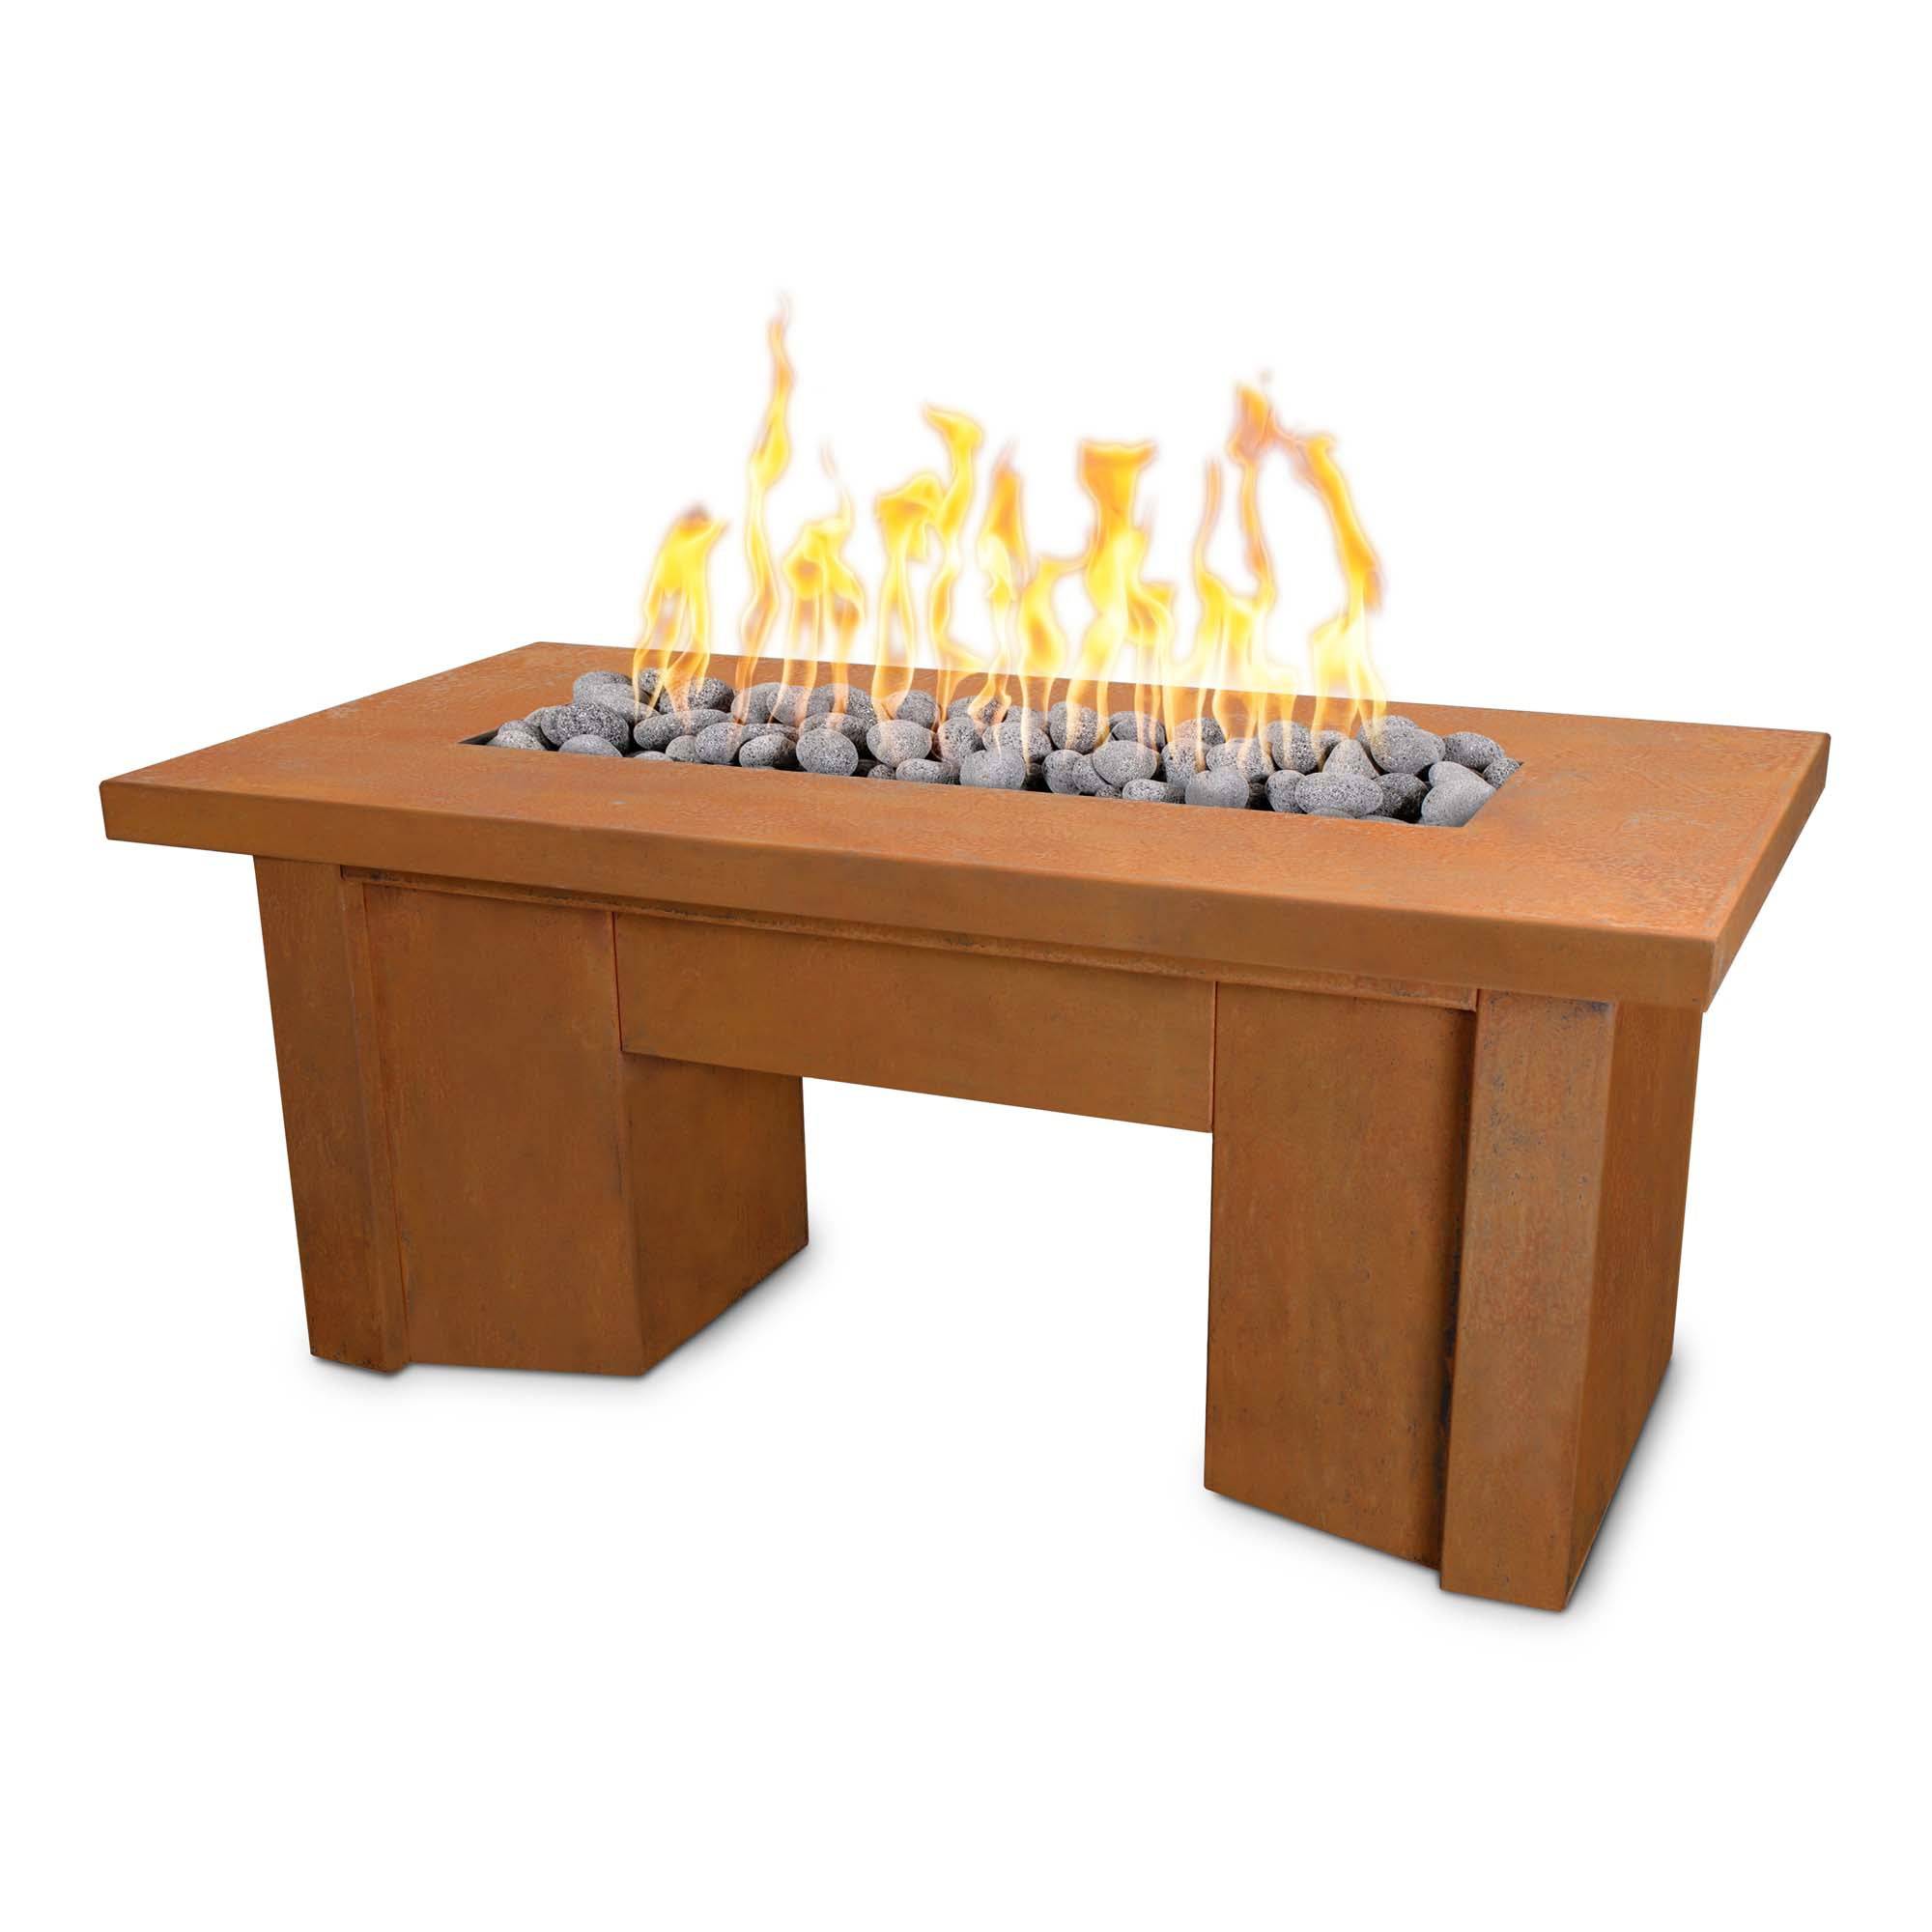 The Outdoor Plus Alameda Fire Pit Corten Steel OPT-ALMCSXX - Serenity Provision